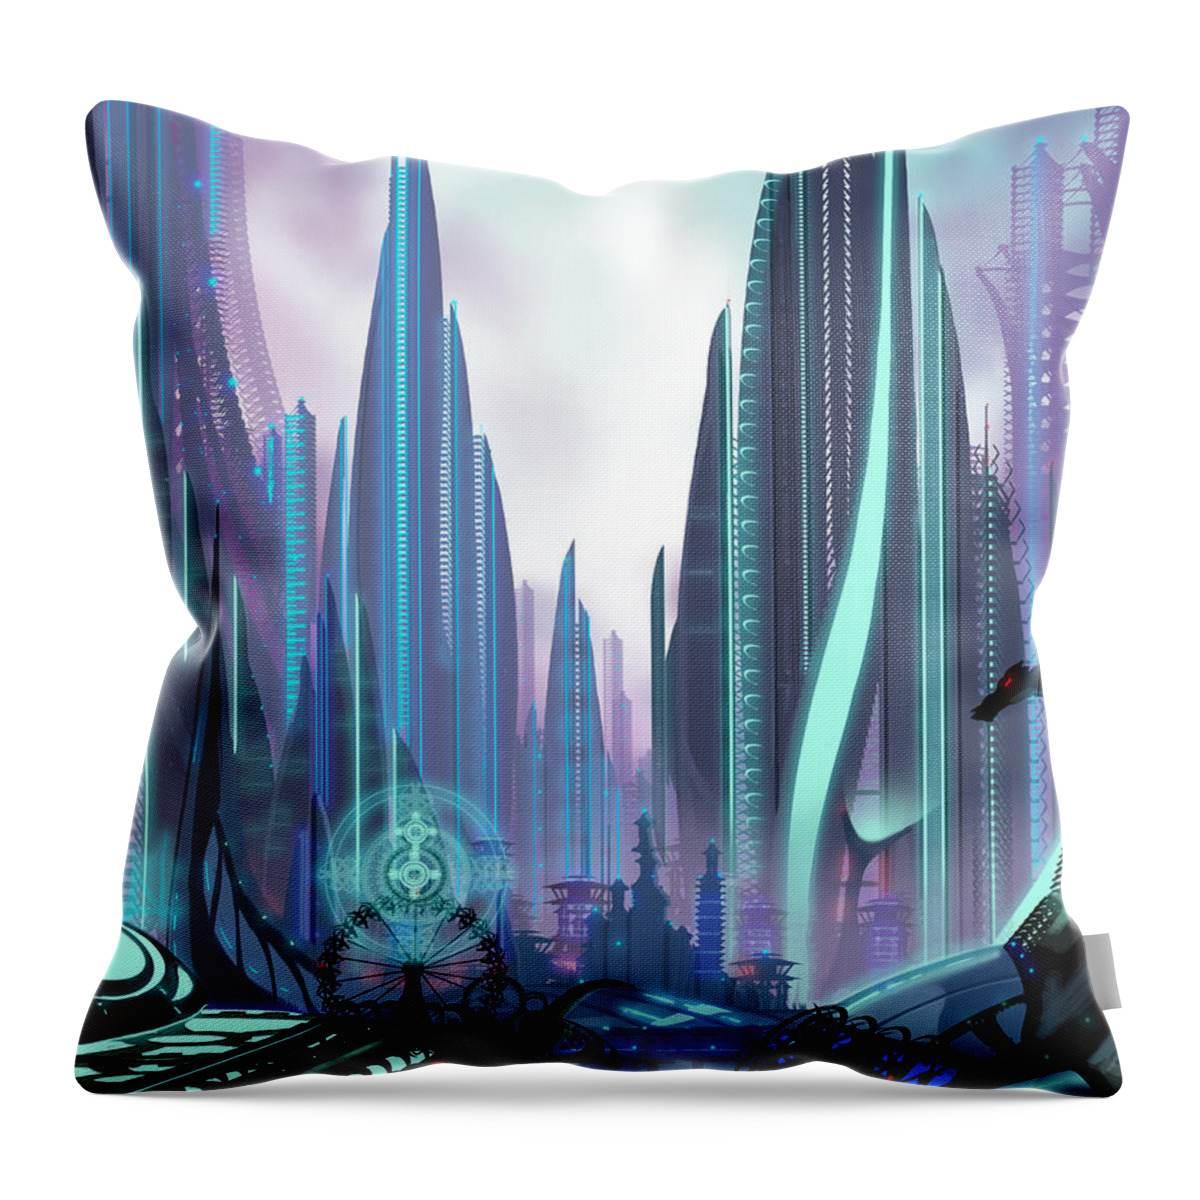 Science Fiction City Throw Pillow featuring the painting Transia by James Hill